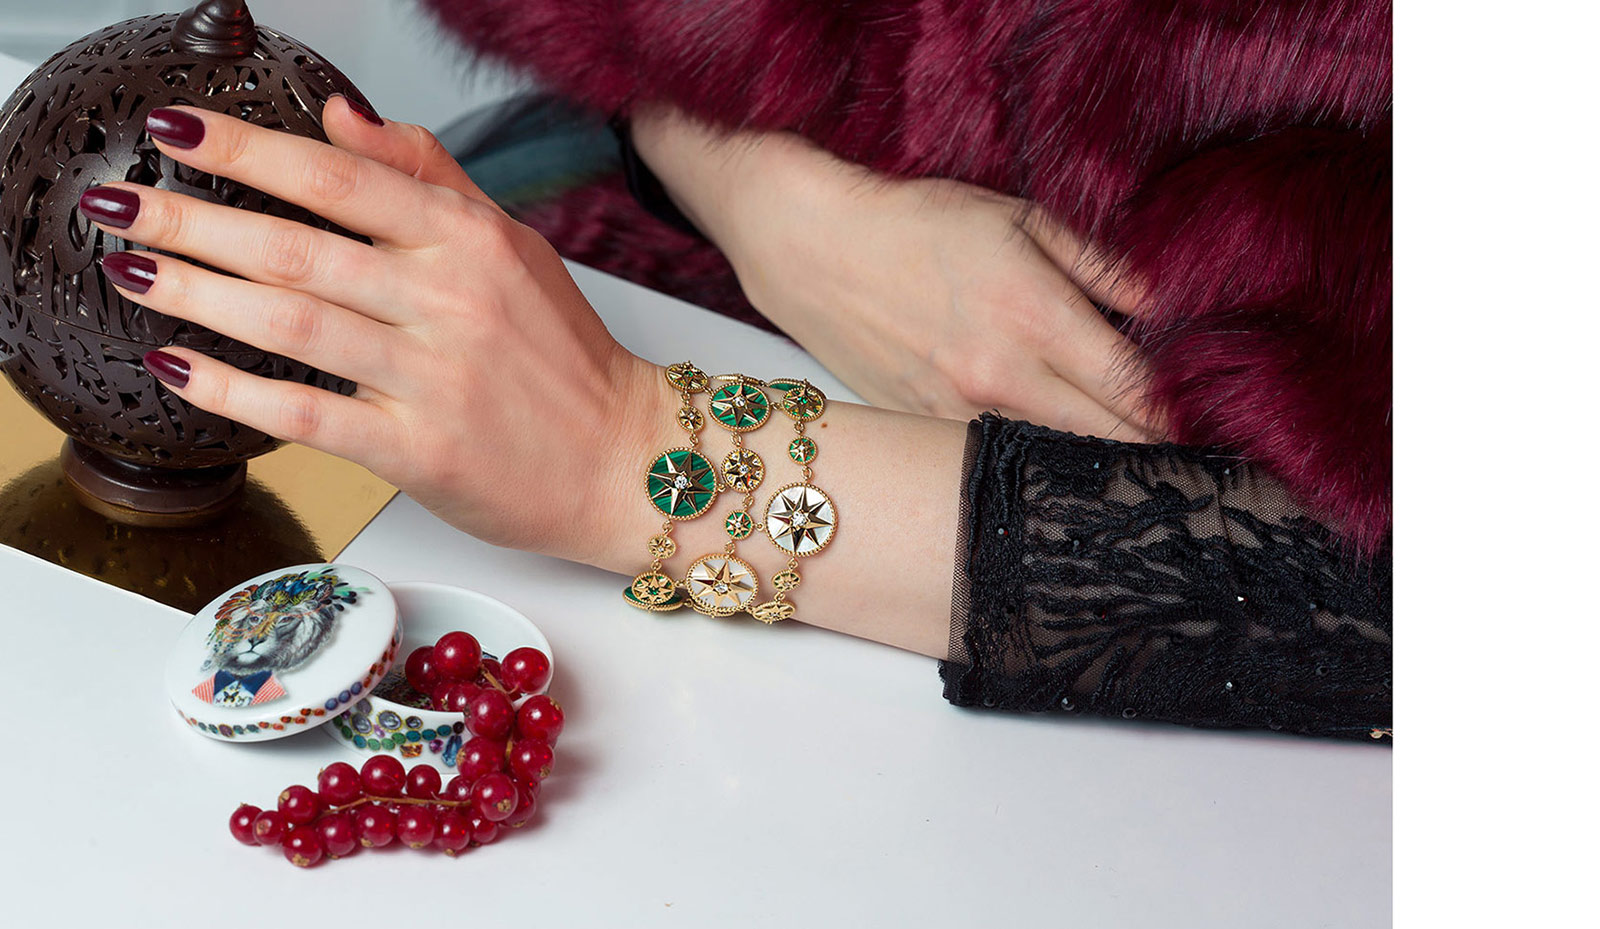 The Dior Joaillerie Rose des Vents cuff bracelet in yellow gold with diamonds, emeralds, mother-of-pearl and malachite, paired with a dress and coat by Promulias